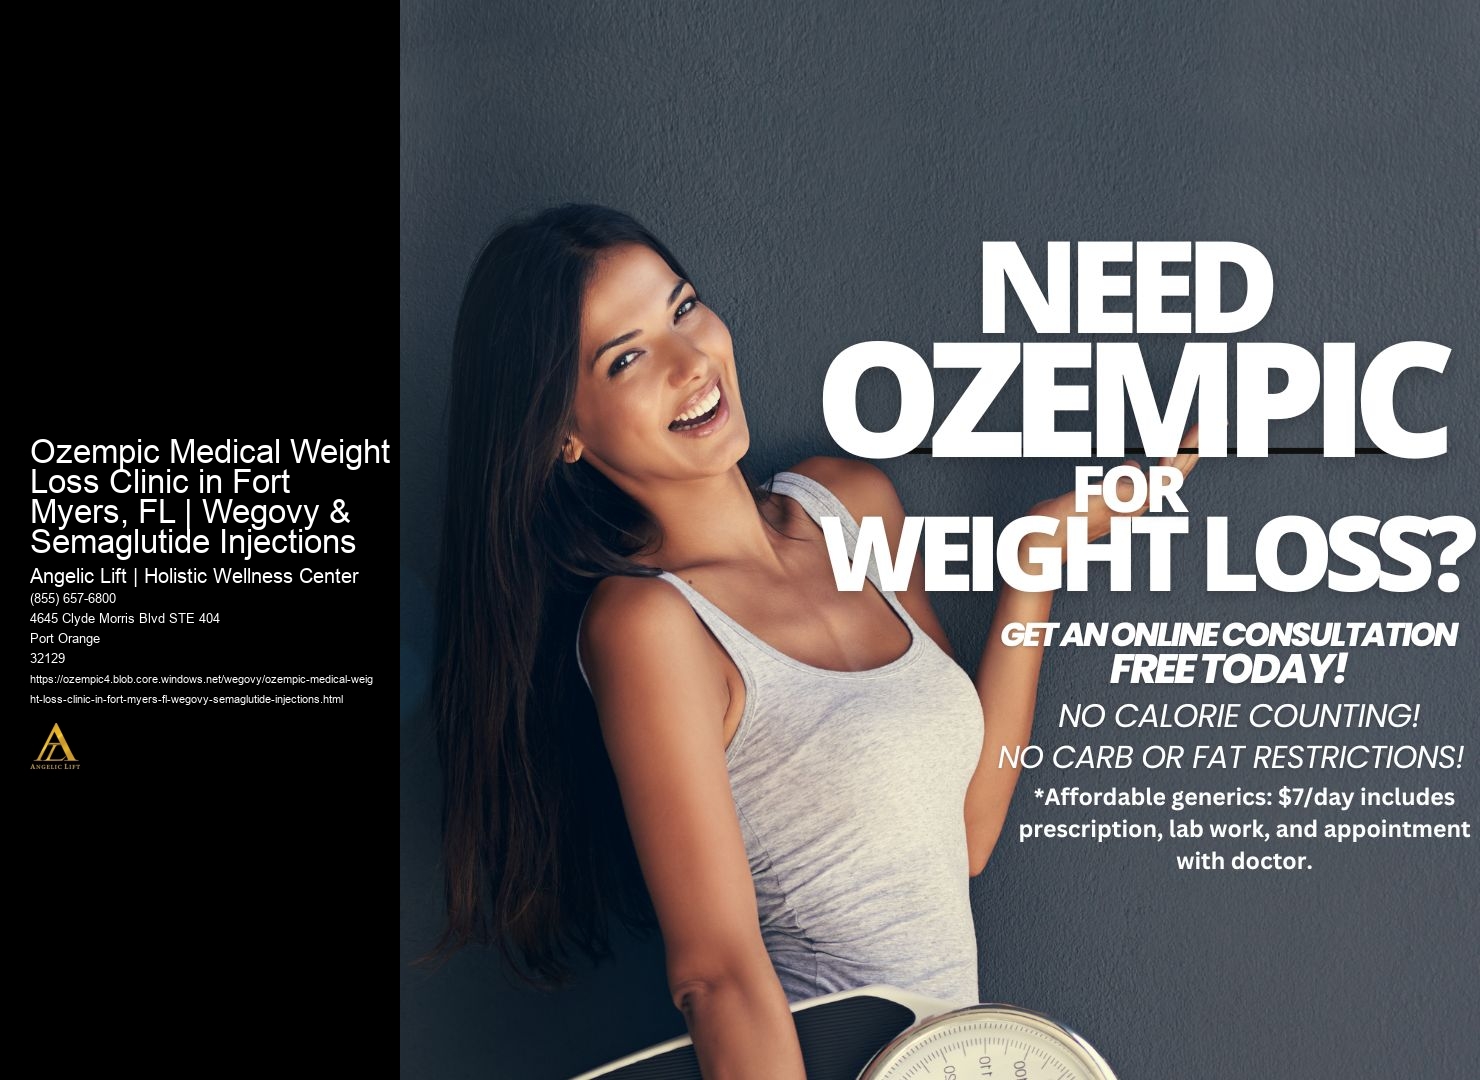 Ozempic Medical Weight Loss Clinic in Fort Myers, FL | Wegovy & Semaglutide Injections